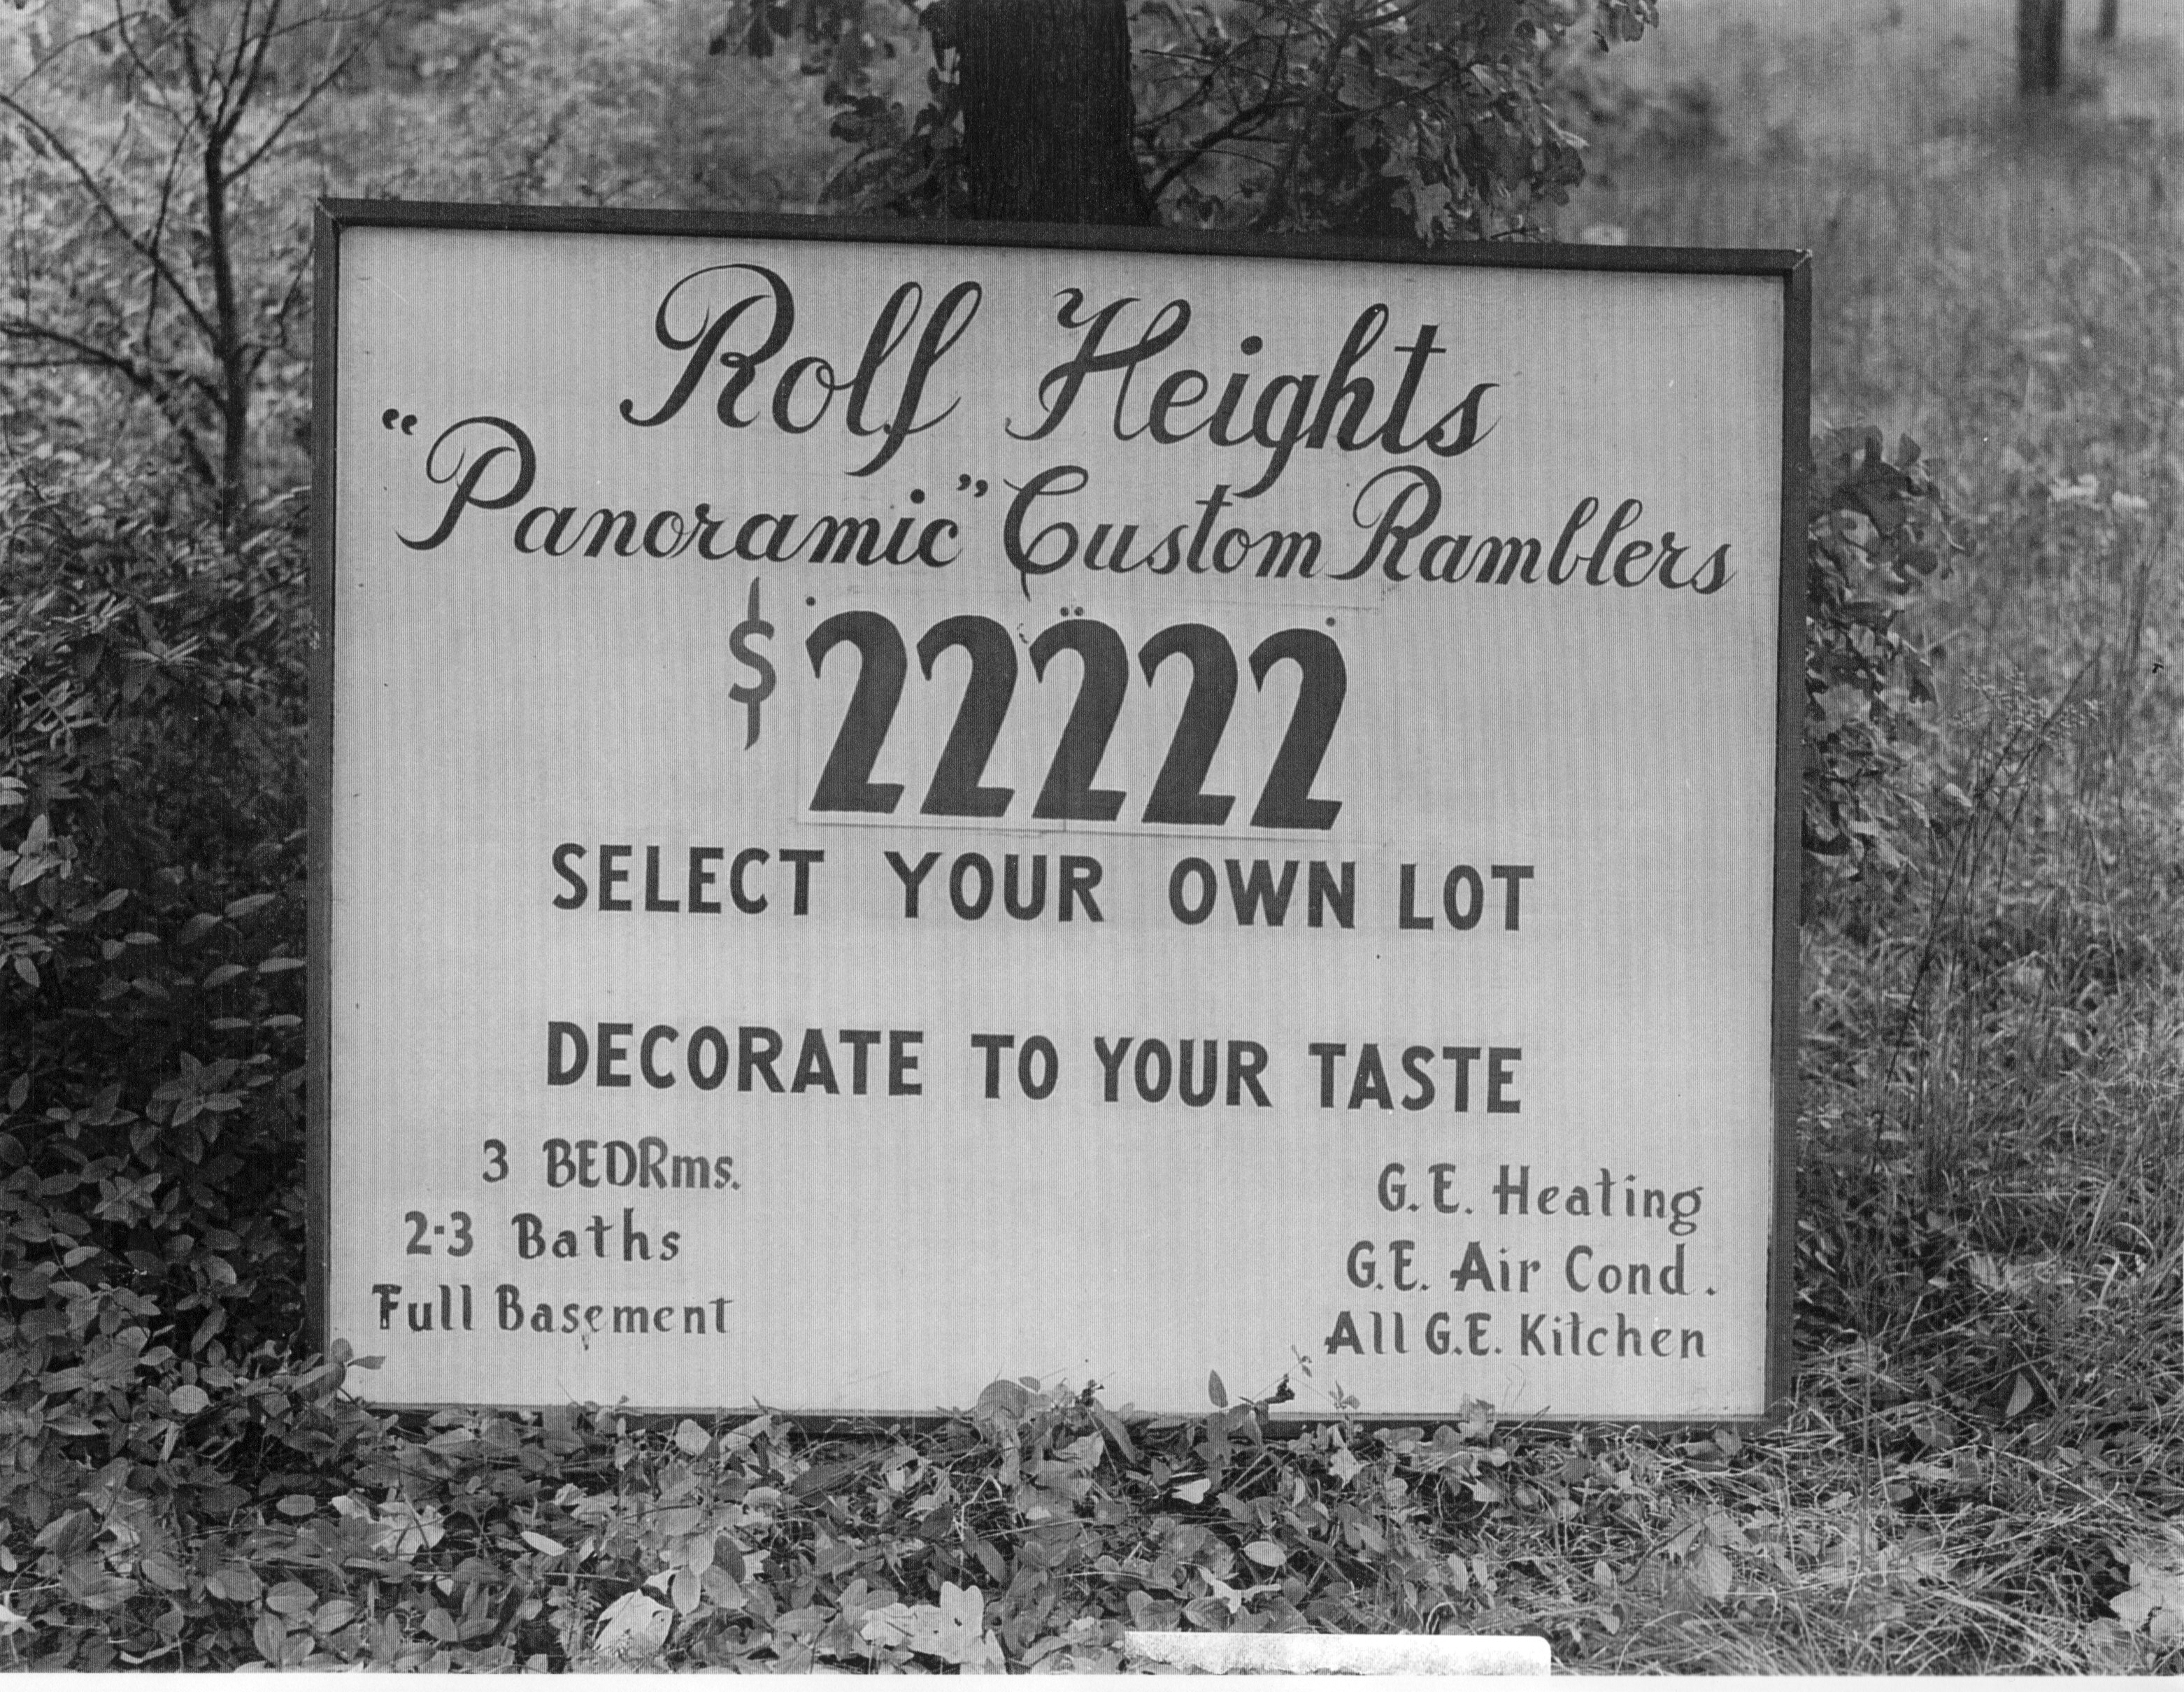 Rolf Heights Sales Sign 1955 - Photo courtesy of the Annandale Chamber of Commerce Photographic Archive with all rights of use reserved.